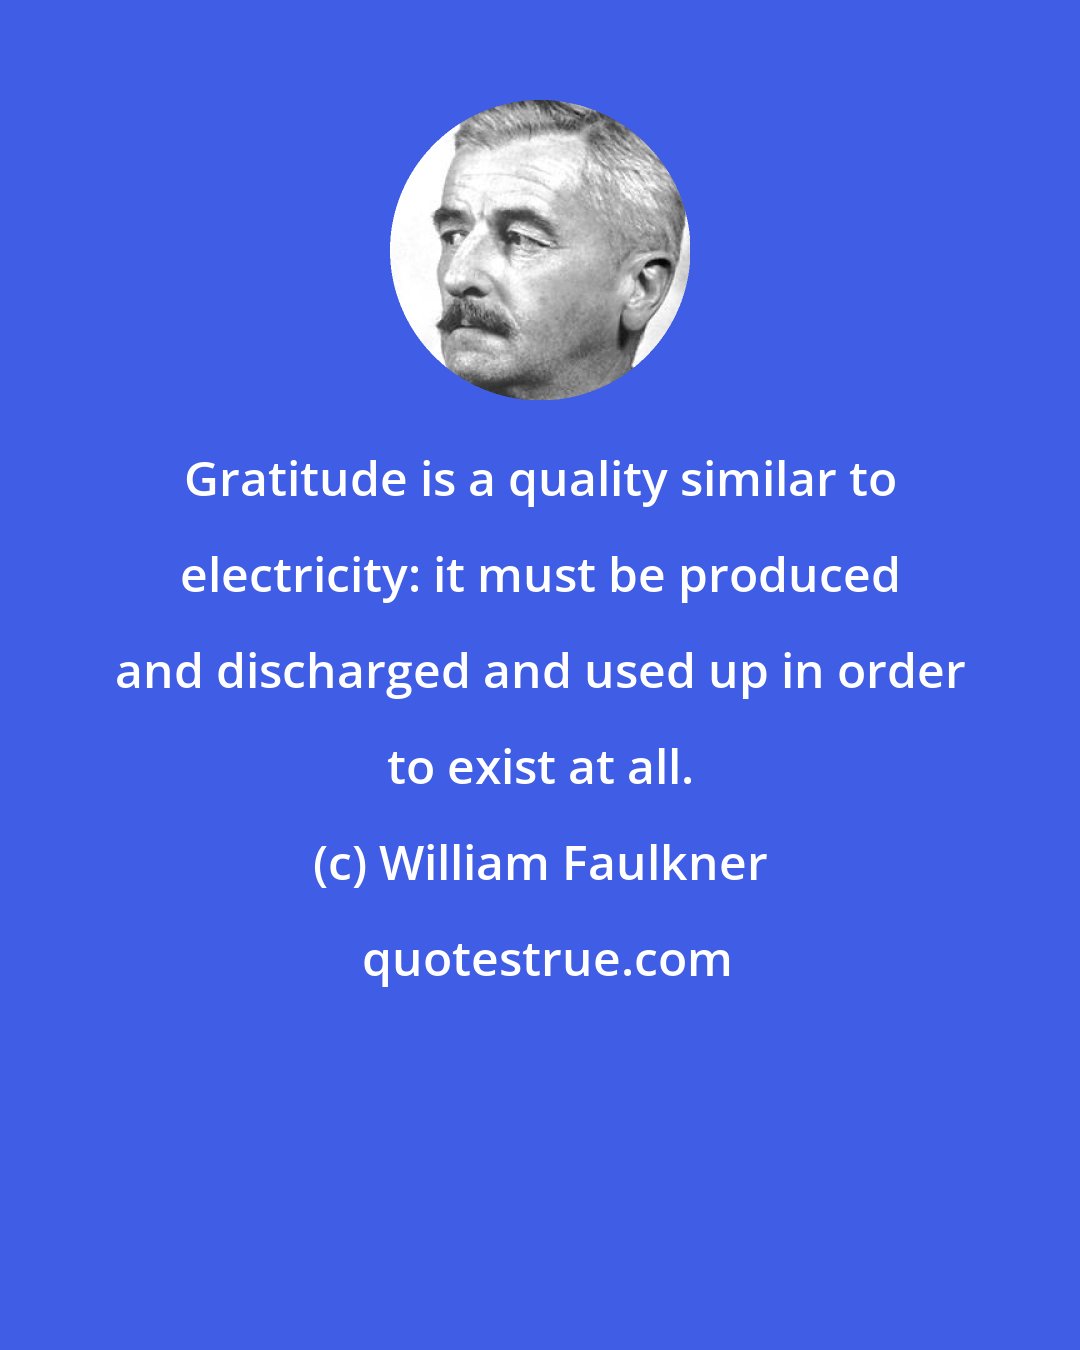 William Faulkner: Gratitude is a quality similar to electricity: it must be produced and discharged and used up in order to exist at all.